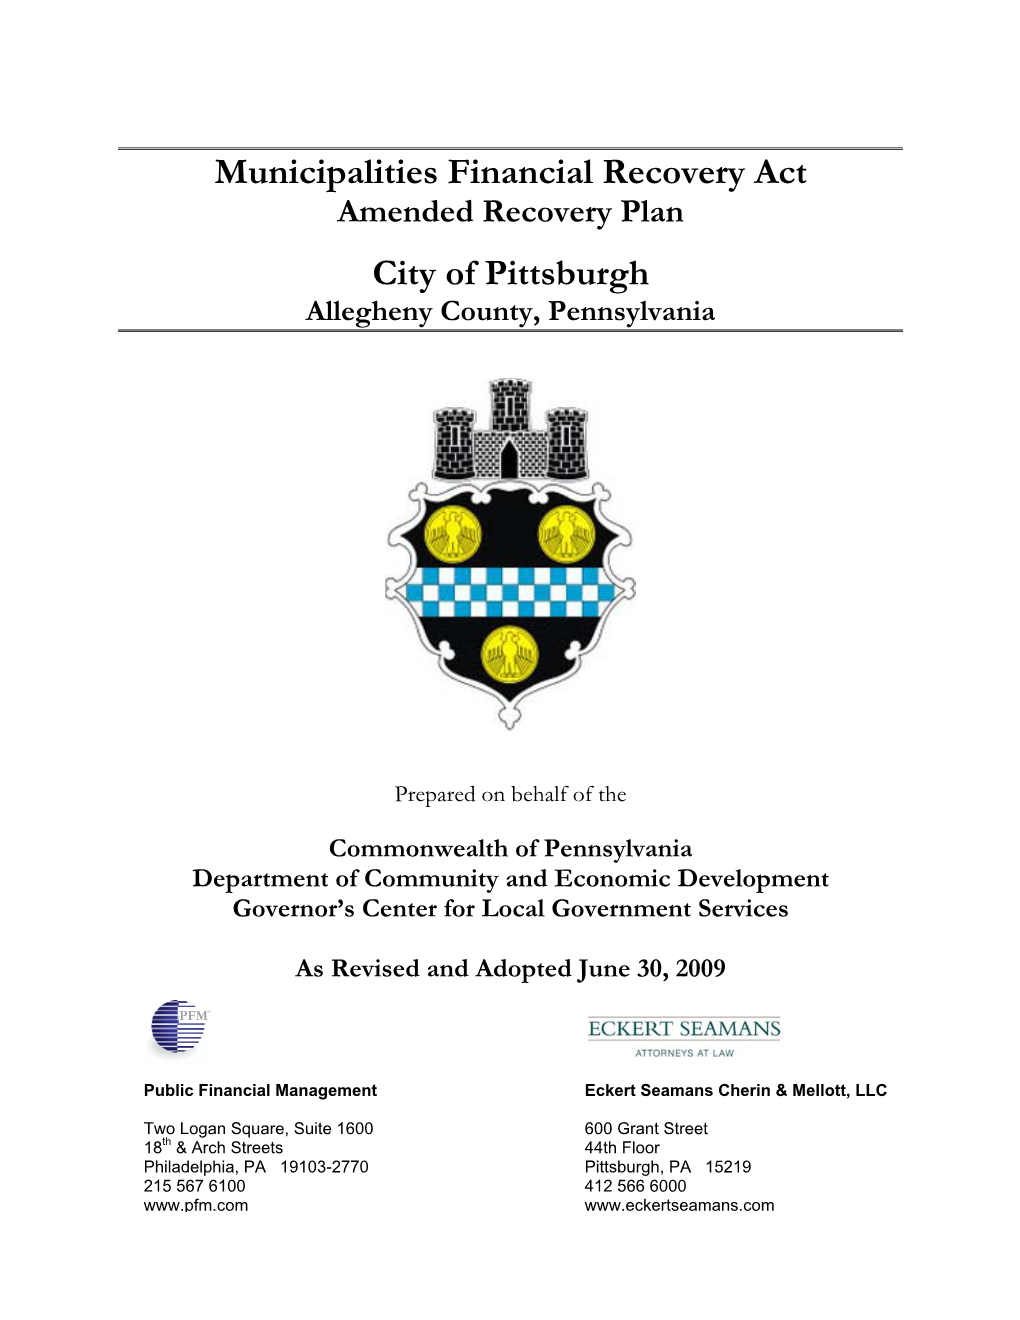 Municipalities Financial Recovery Act City of Pittsburgh